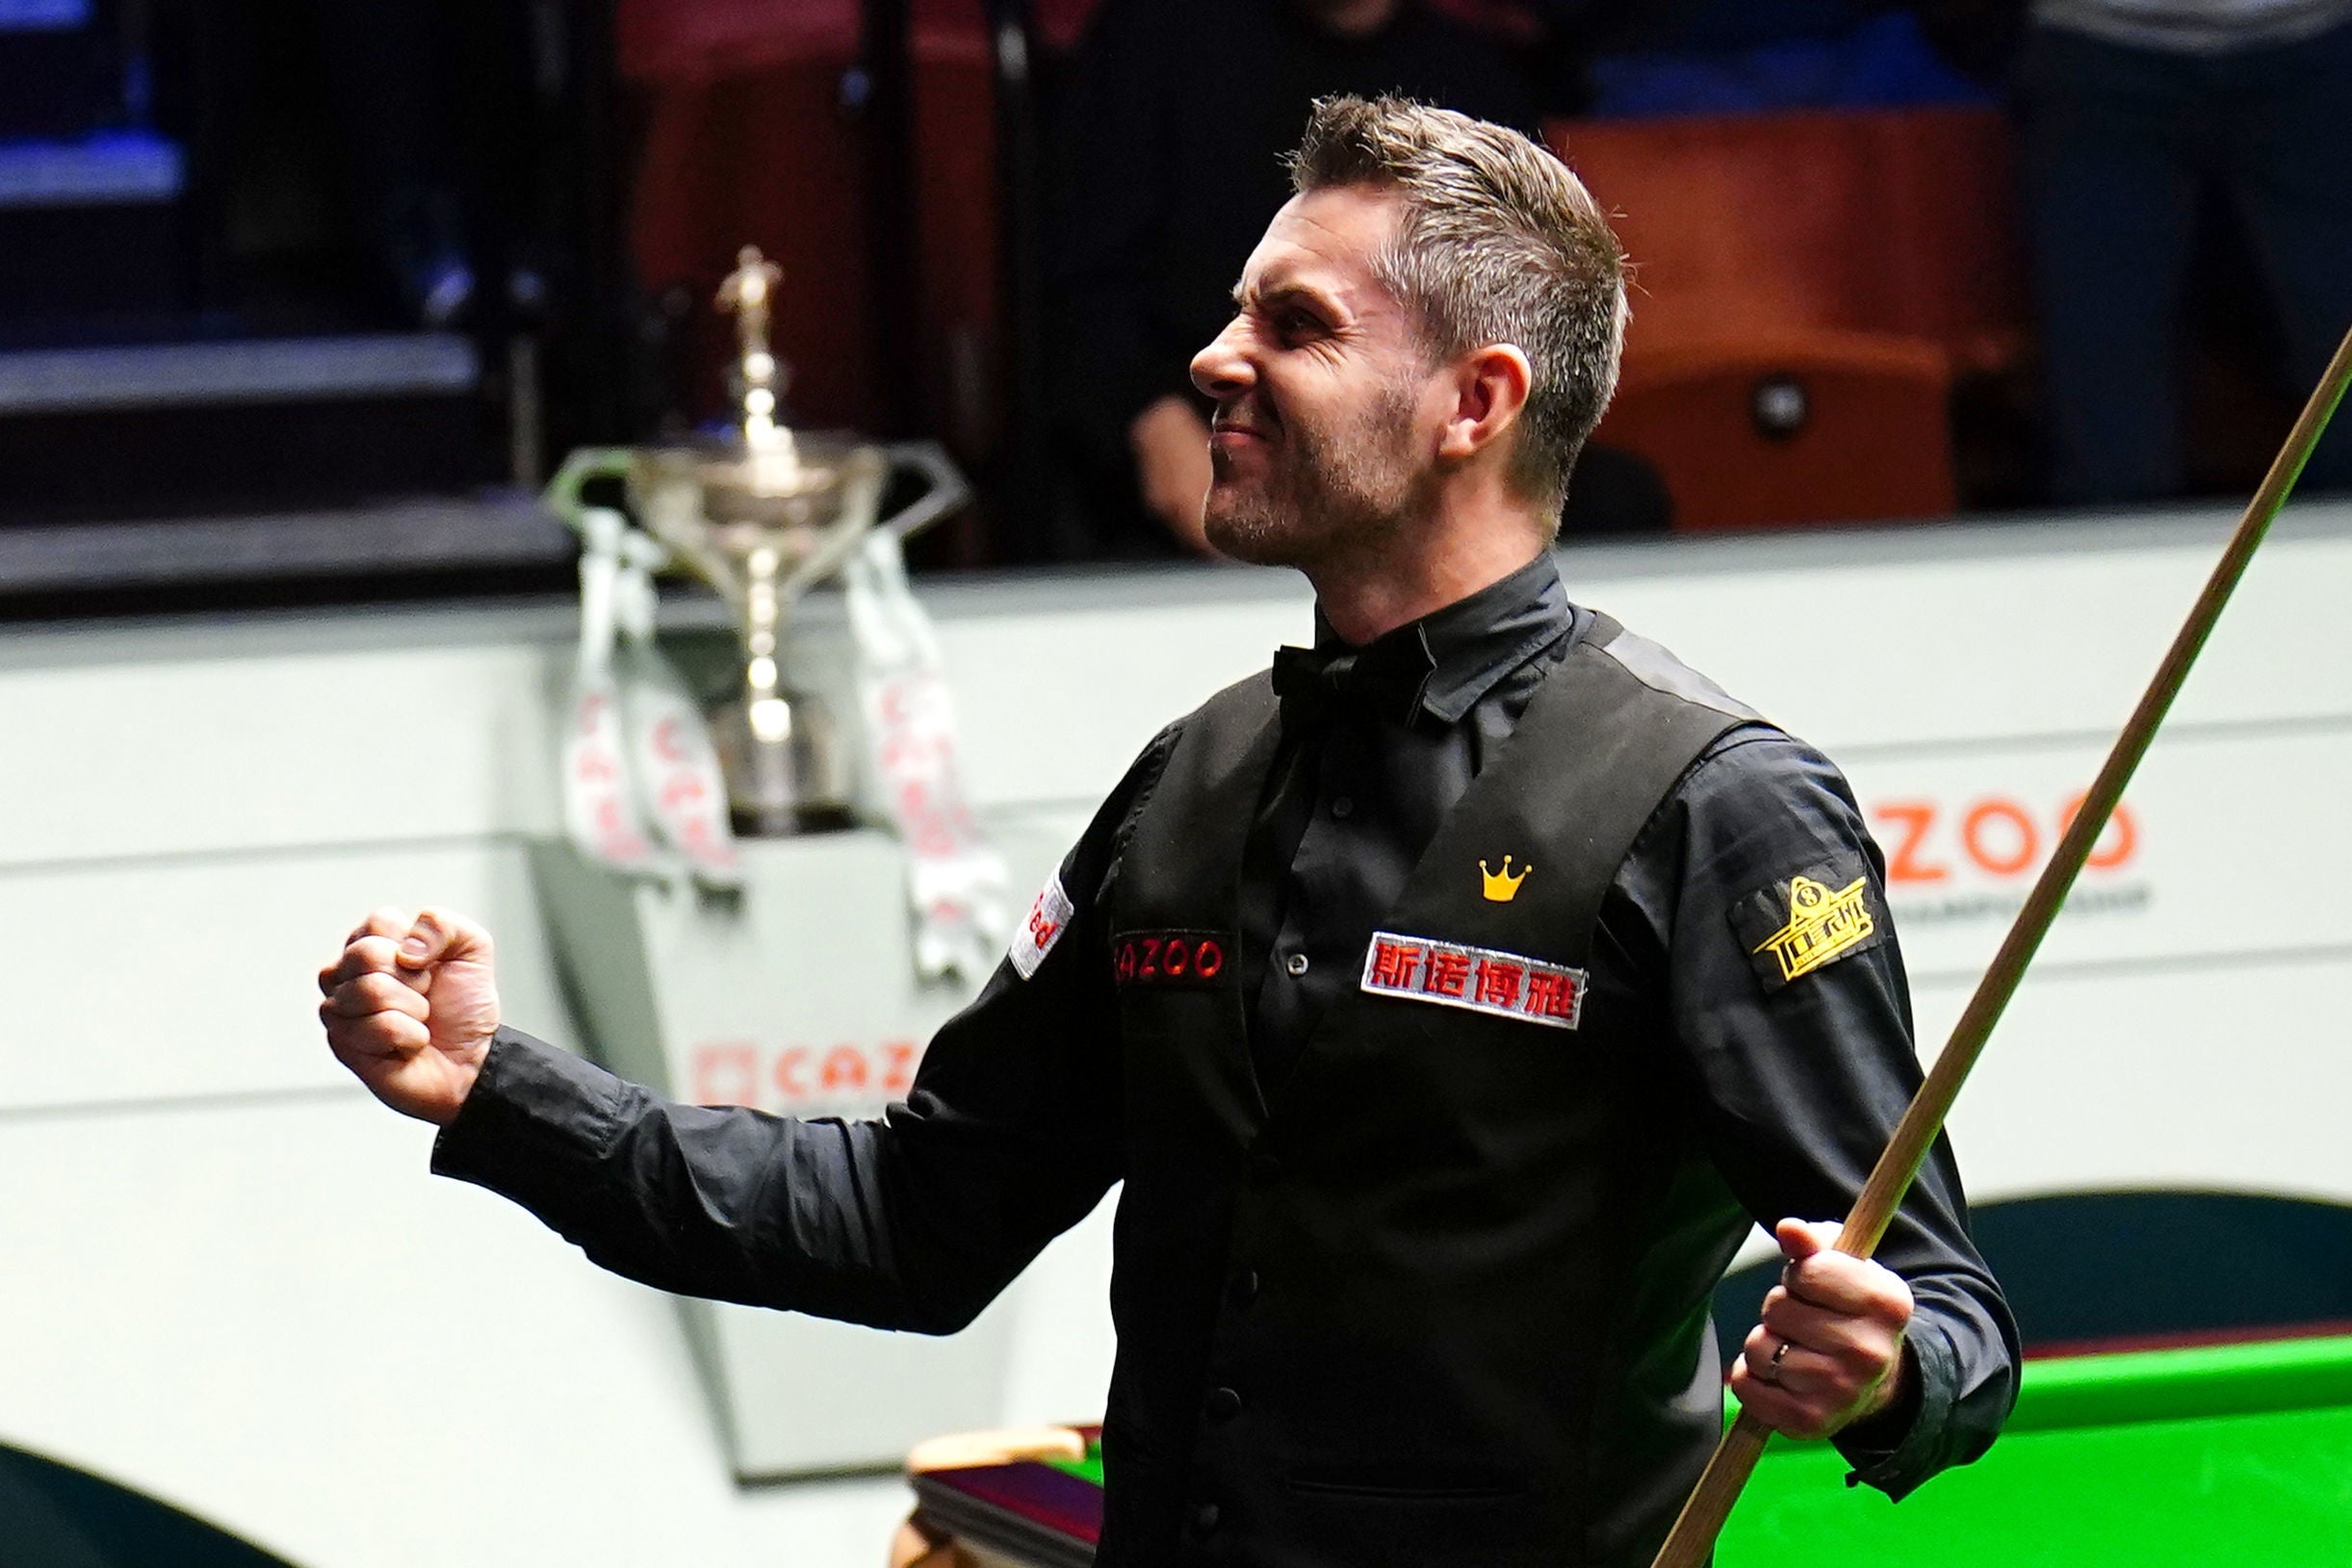 Mark Selby’s historic 147 overshadows Luca Brecel’s bold snooker in